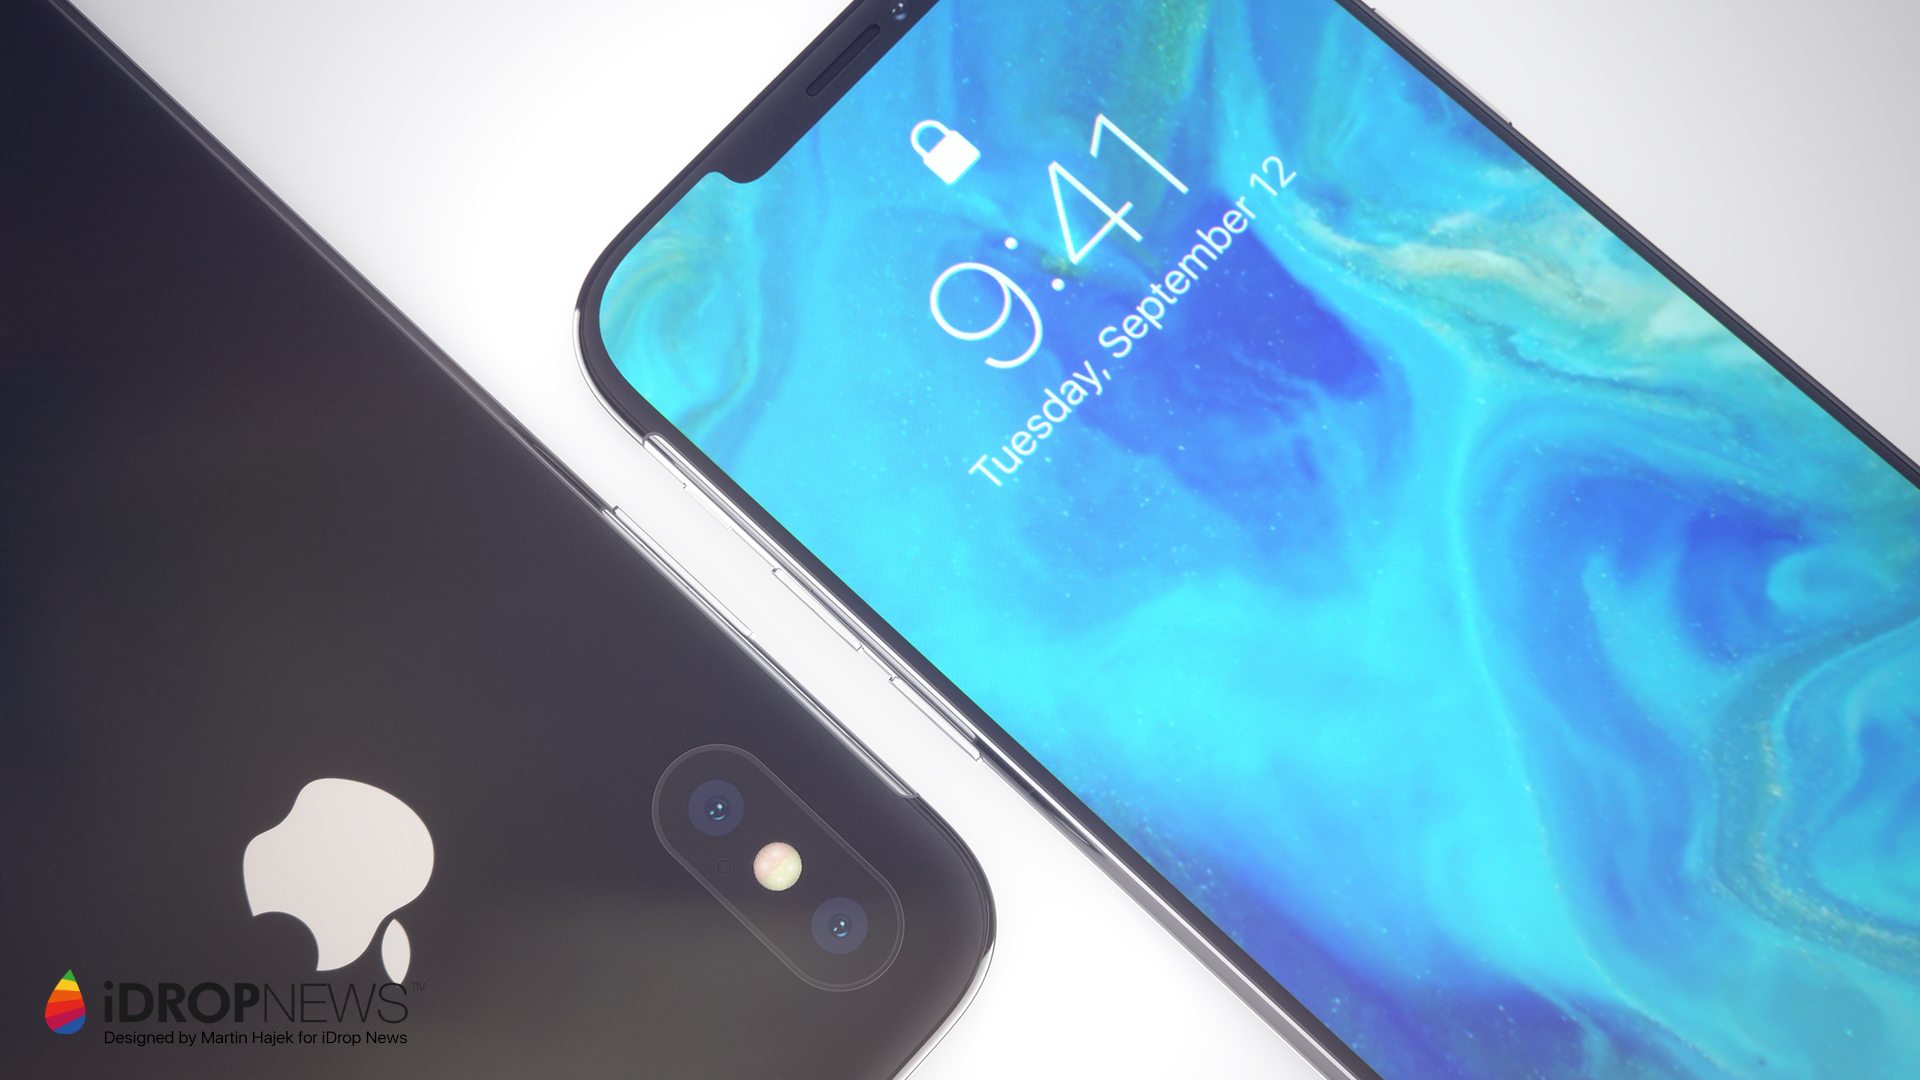 Kuo: Apple May Offer Two 6.1-Inch iPhone Models in 2018 – One Could be Priced as Low as $550